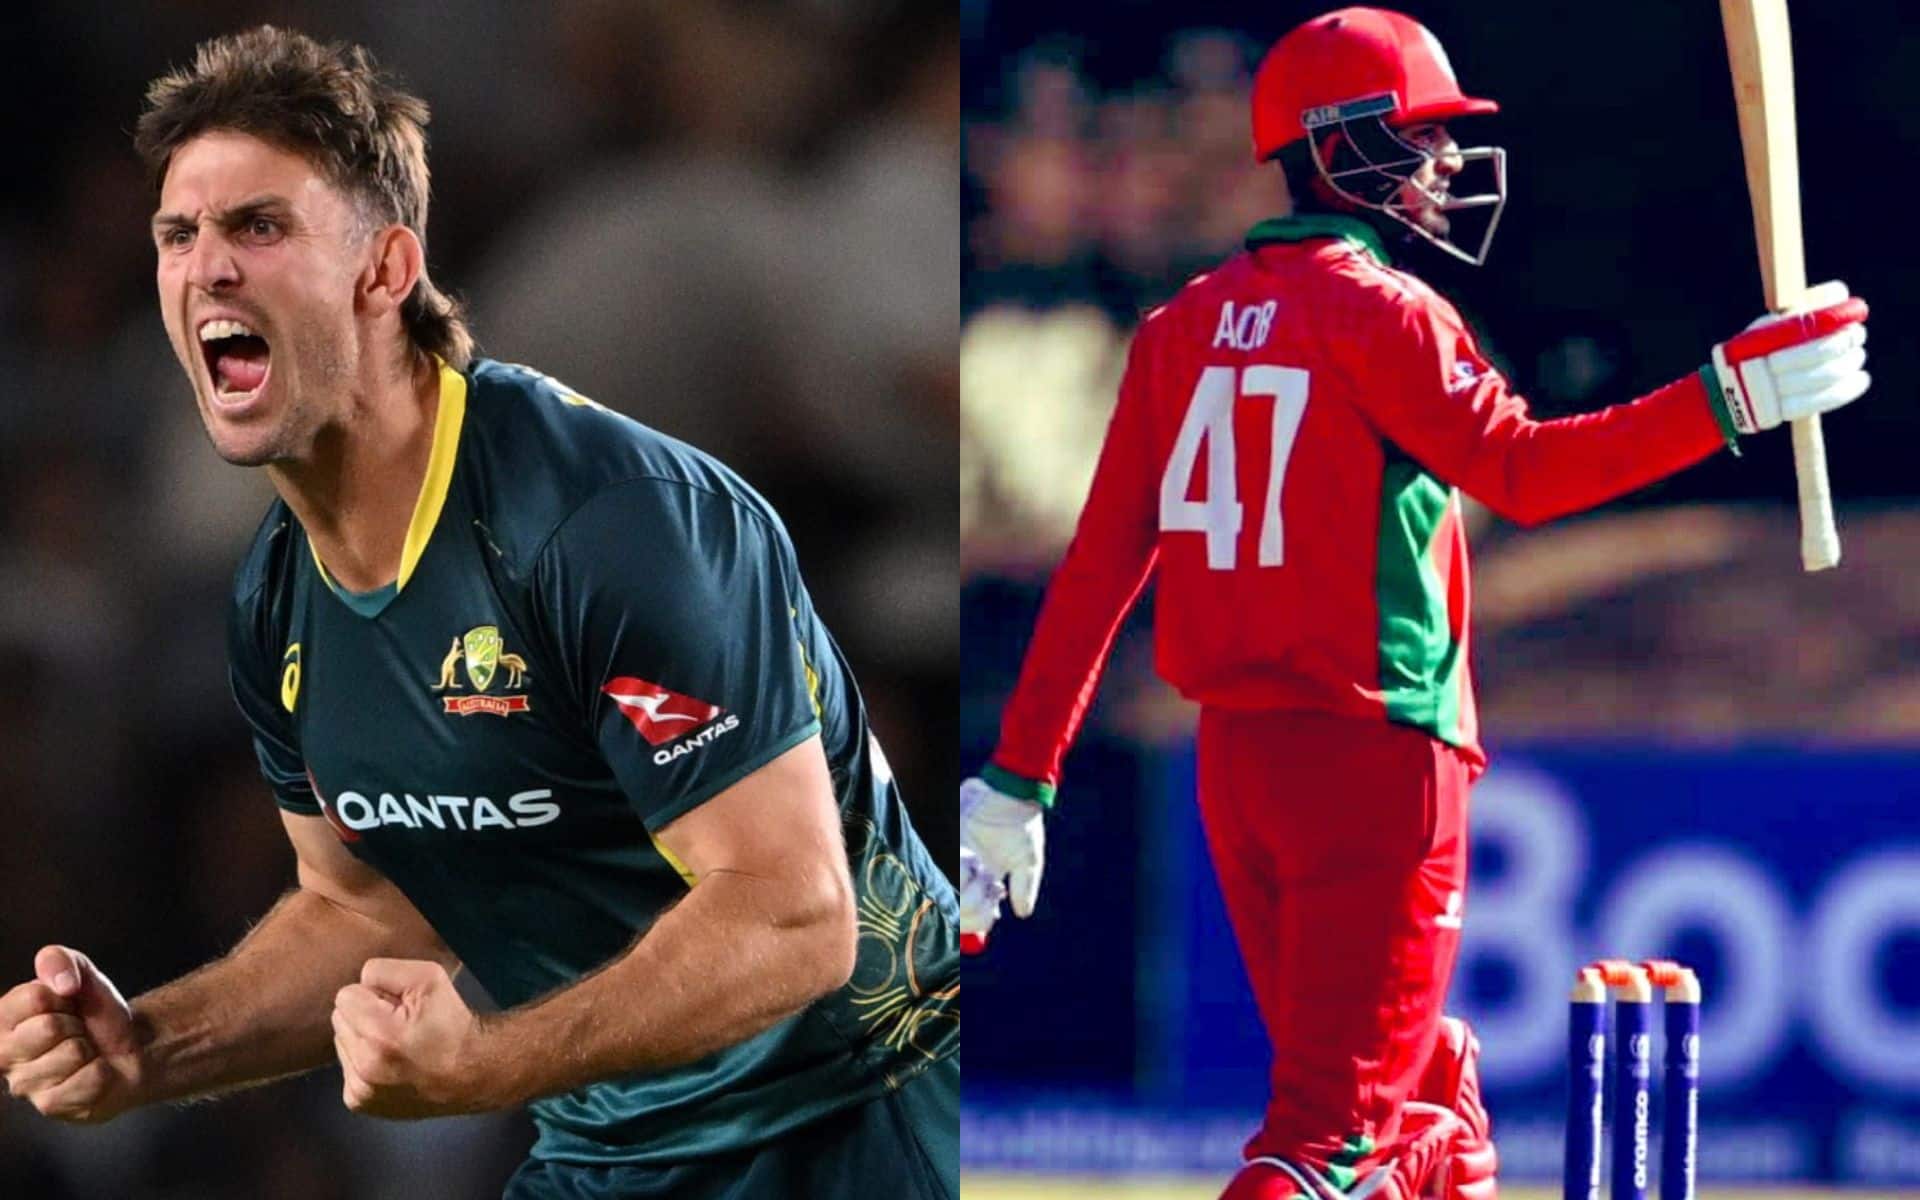 Mitchell Marsh and Aqib Ilyas Sulehri will be leading their respective teams in the match [X]